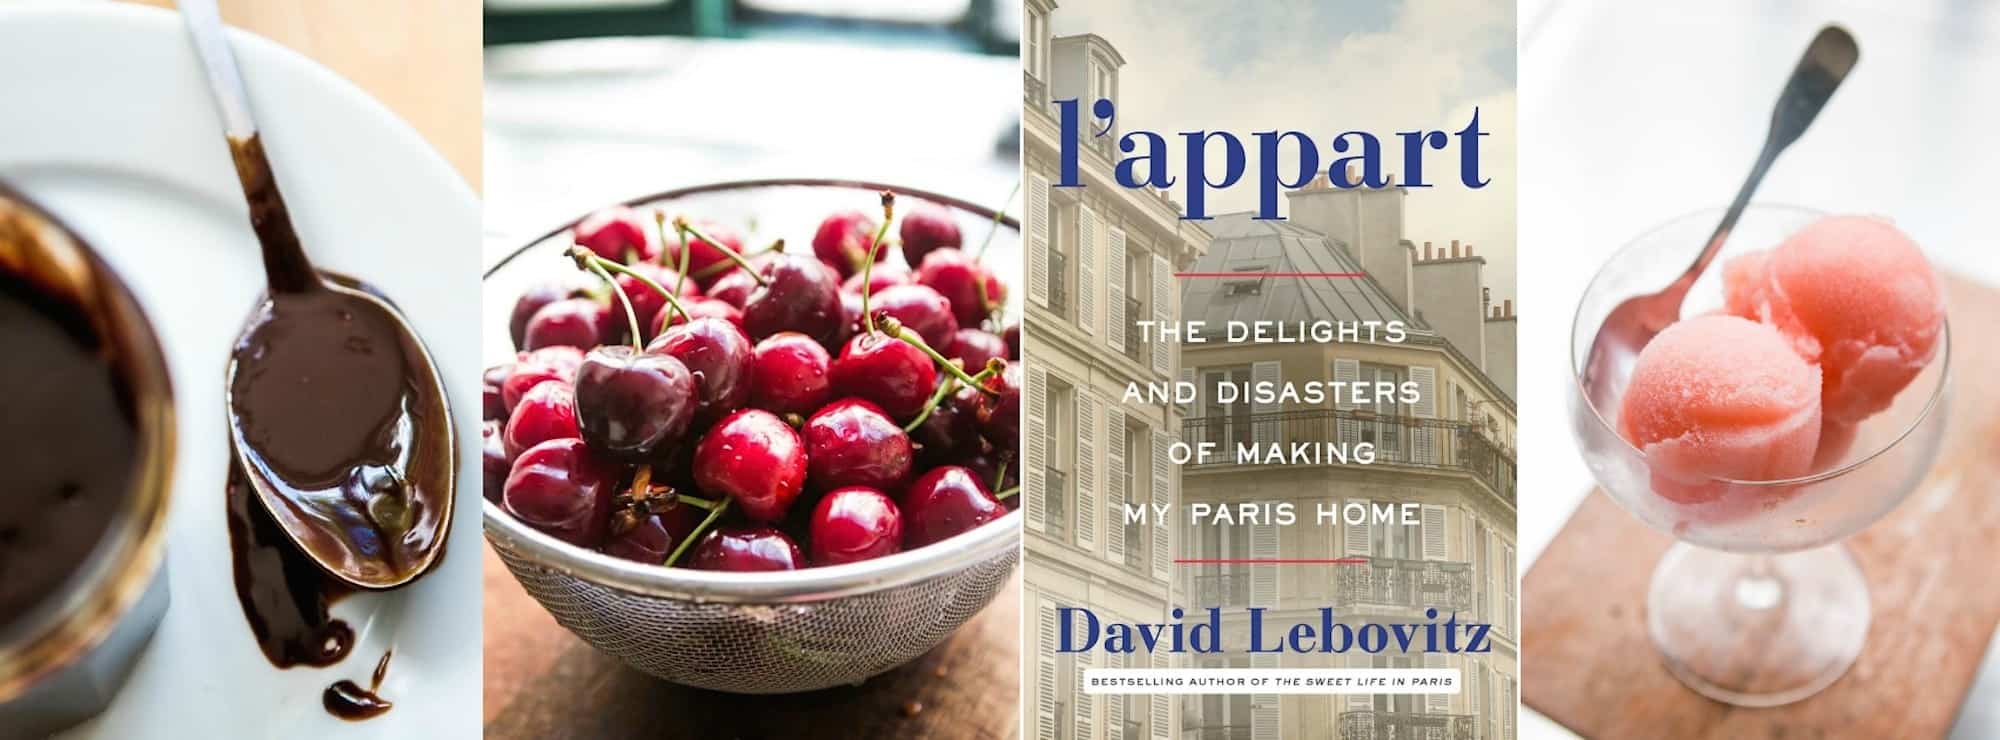 This February in Paris, go to the book signing of expat author David Lebovitz's book at WH Smith.